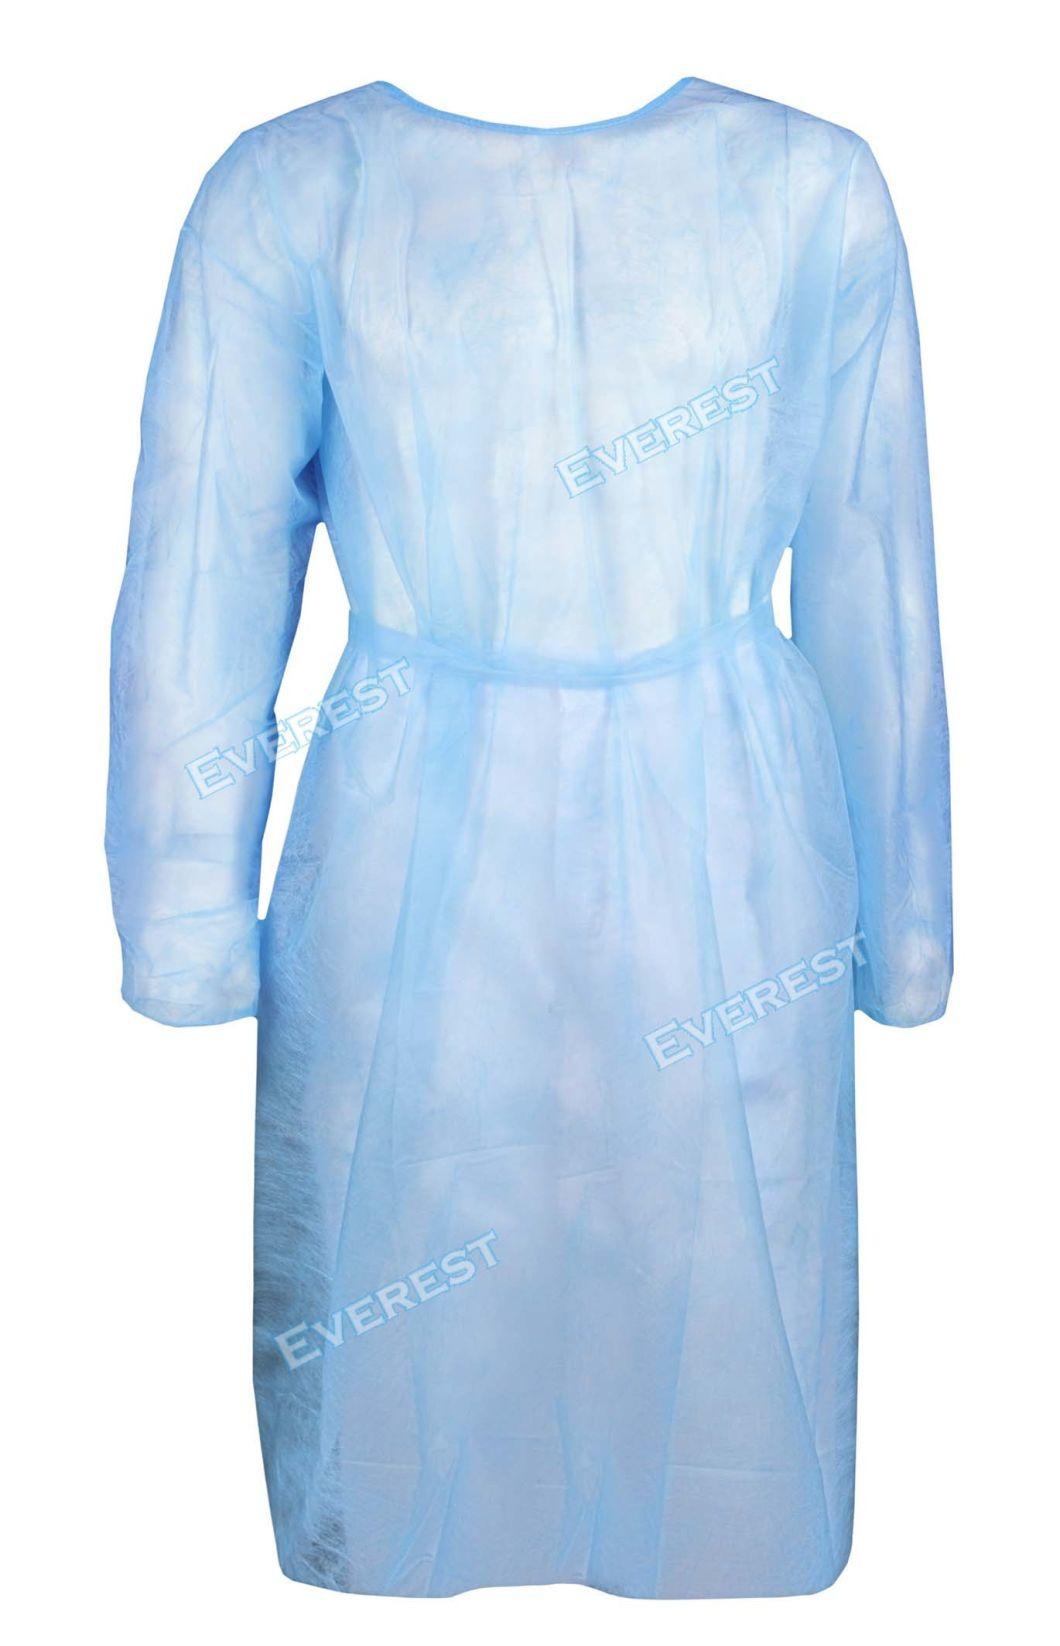 CPE/PP+PE Waterproof Surgical Gown